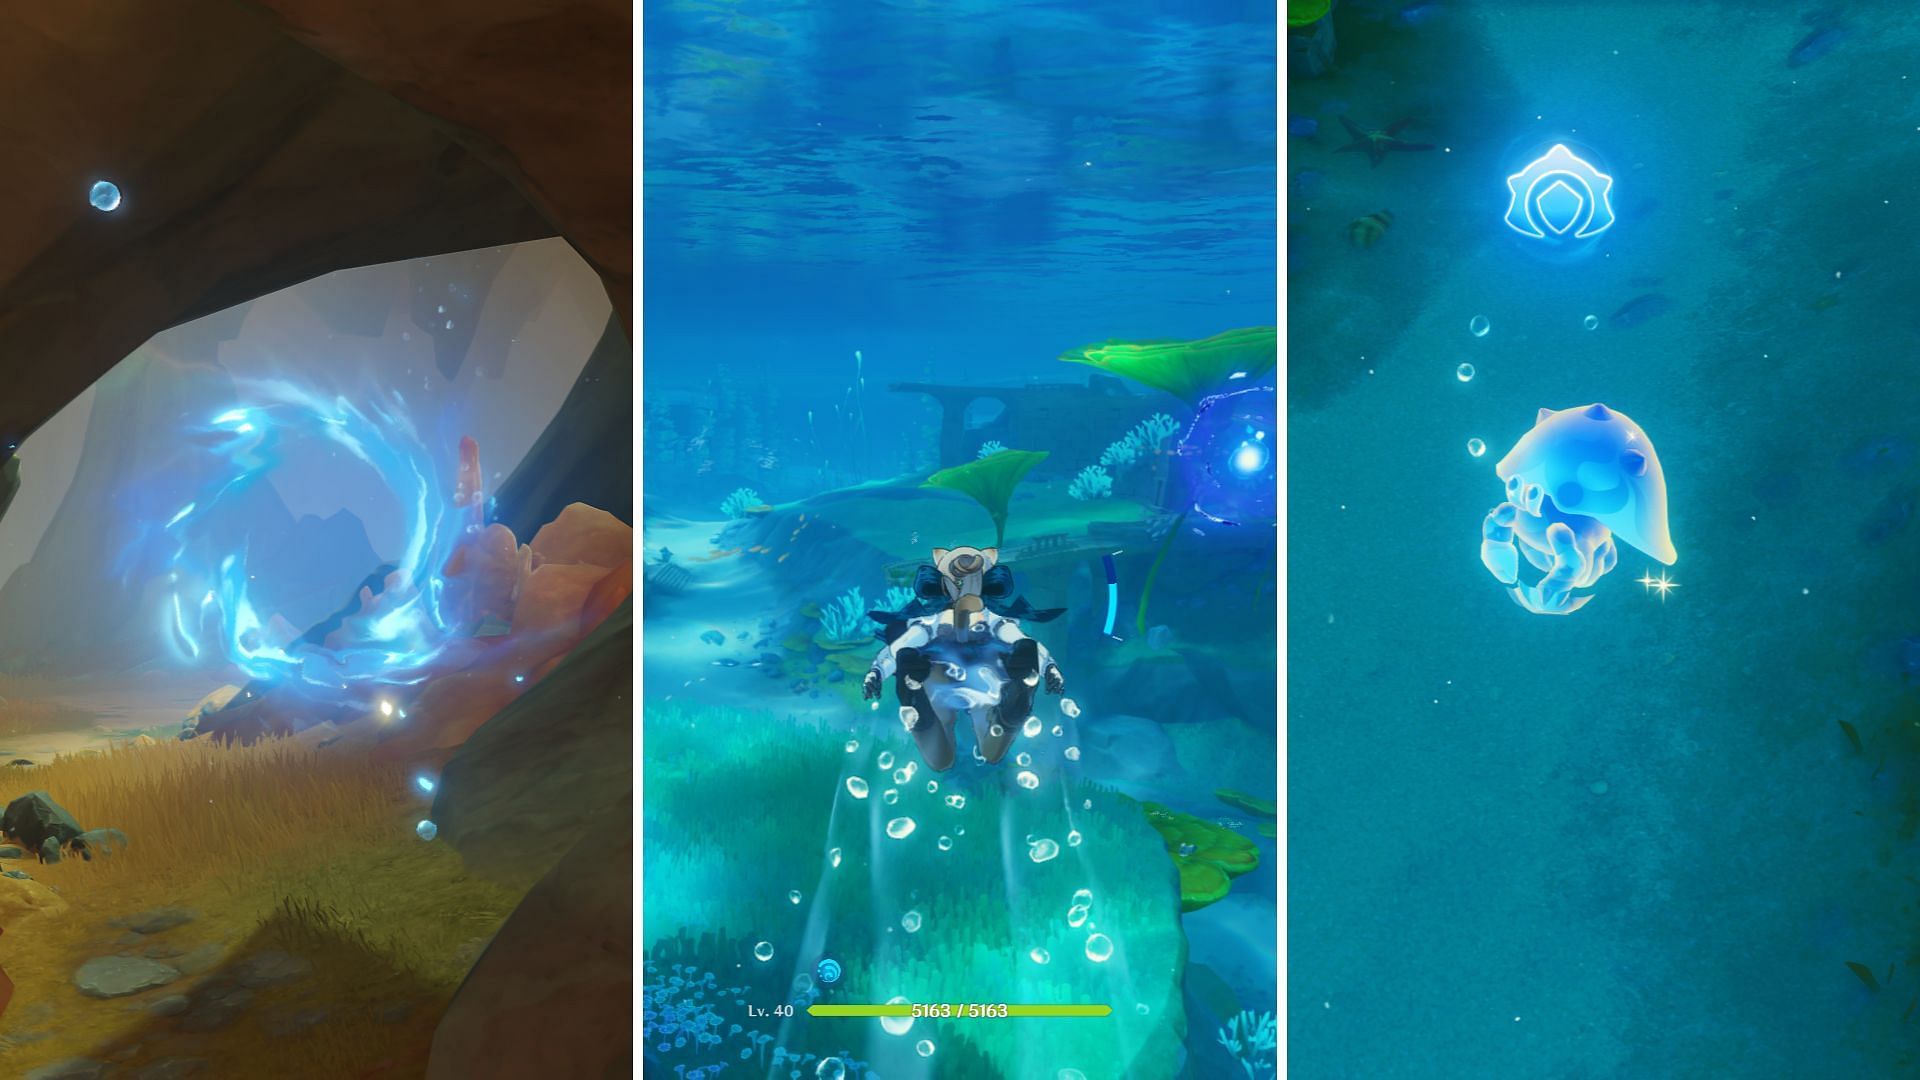 Learn about Fontaine diving and underwater exploration (Image via HoYoverse)